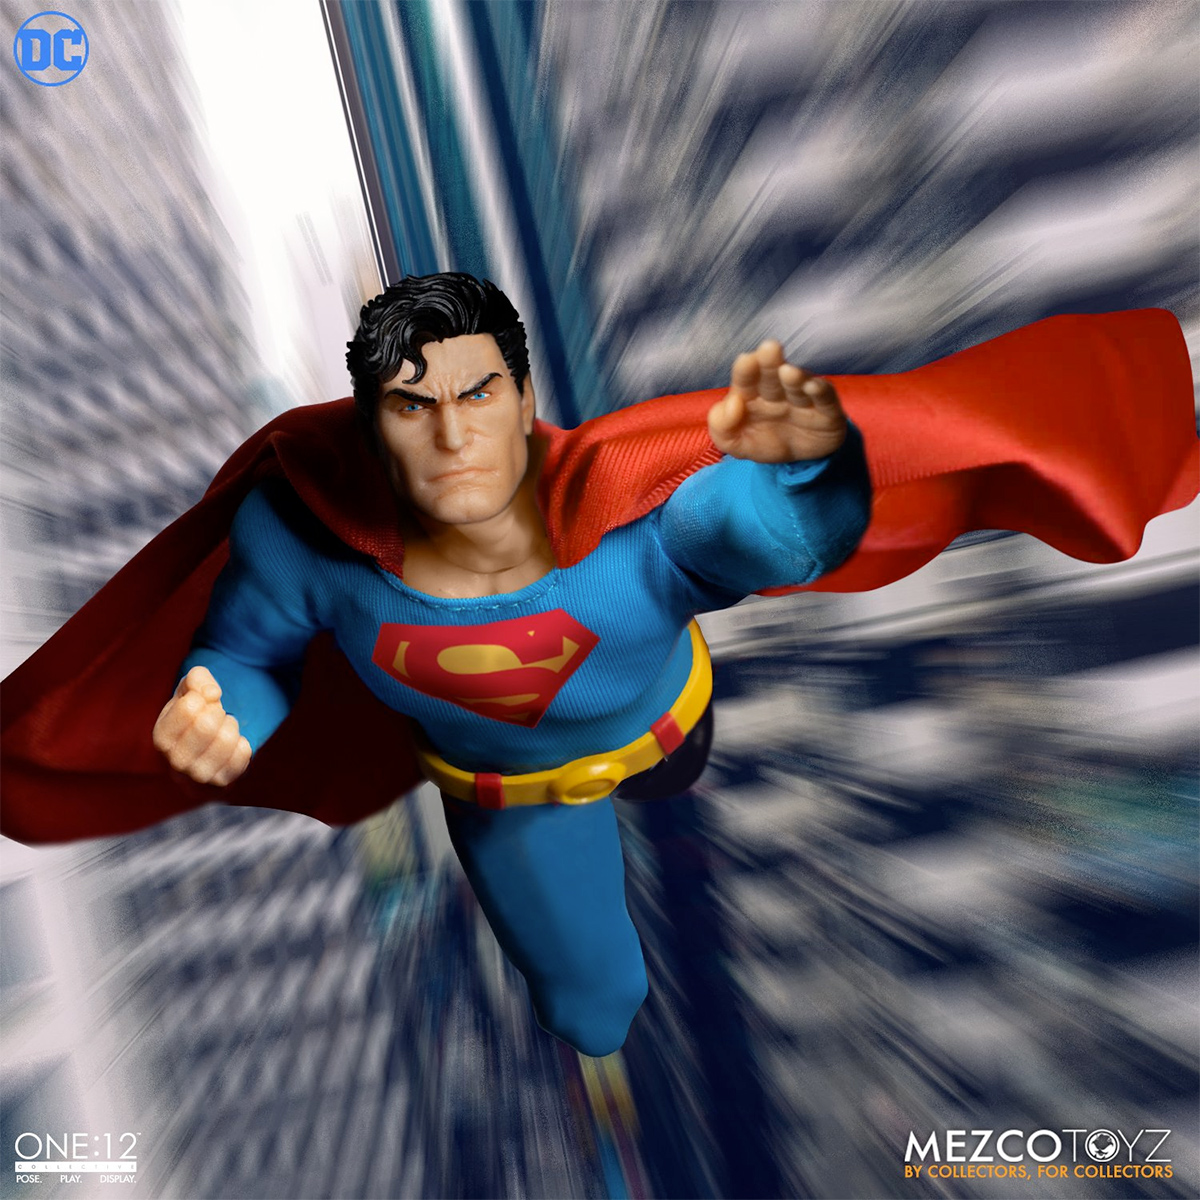 Superman - Man of Steel Edition One:12 Collective Action Figure